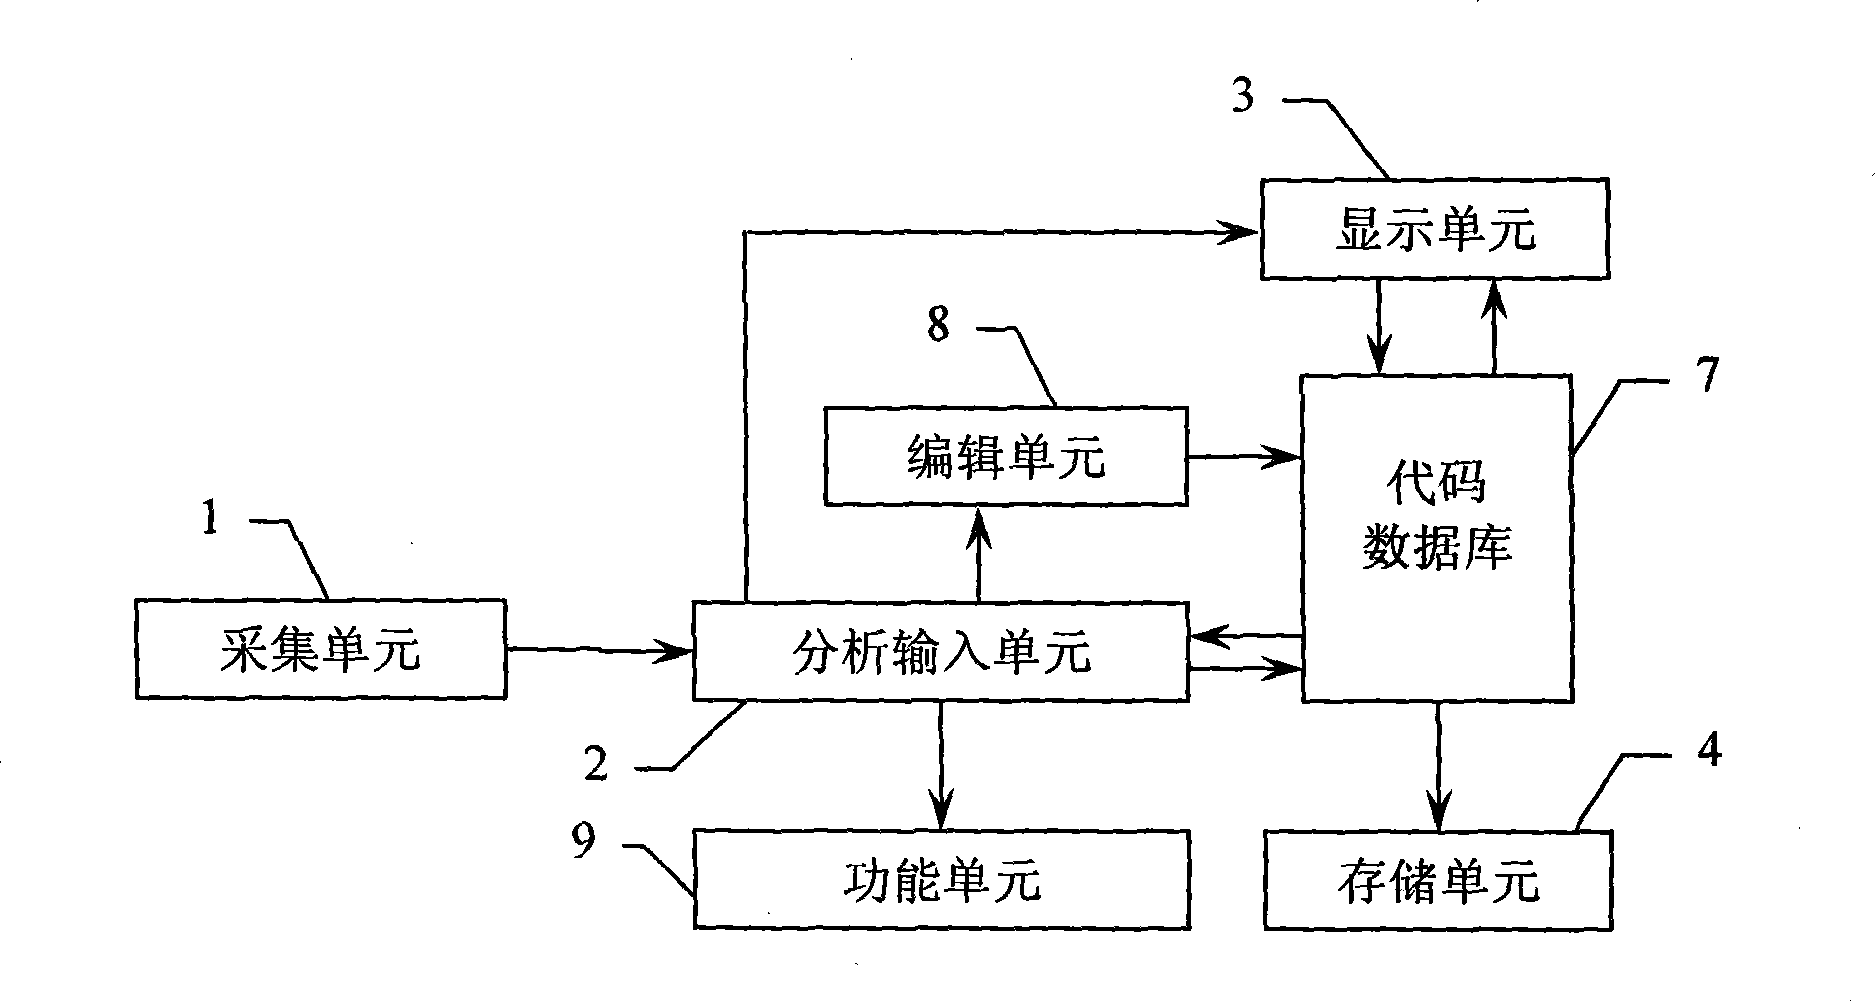 Hand-hold electronic equipment input system with code input selection function